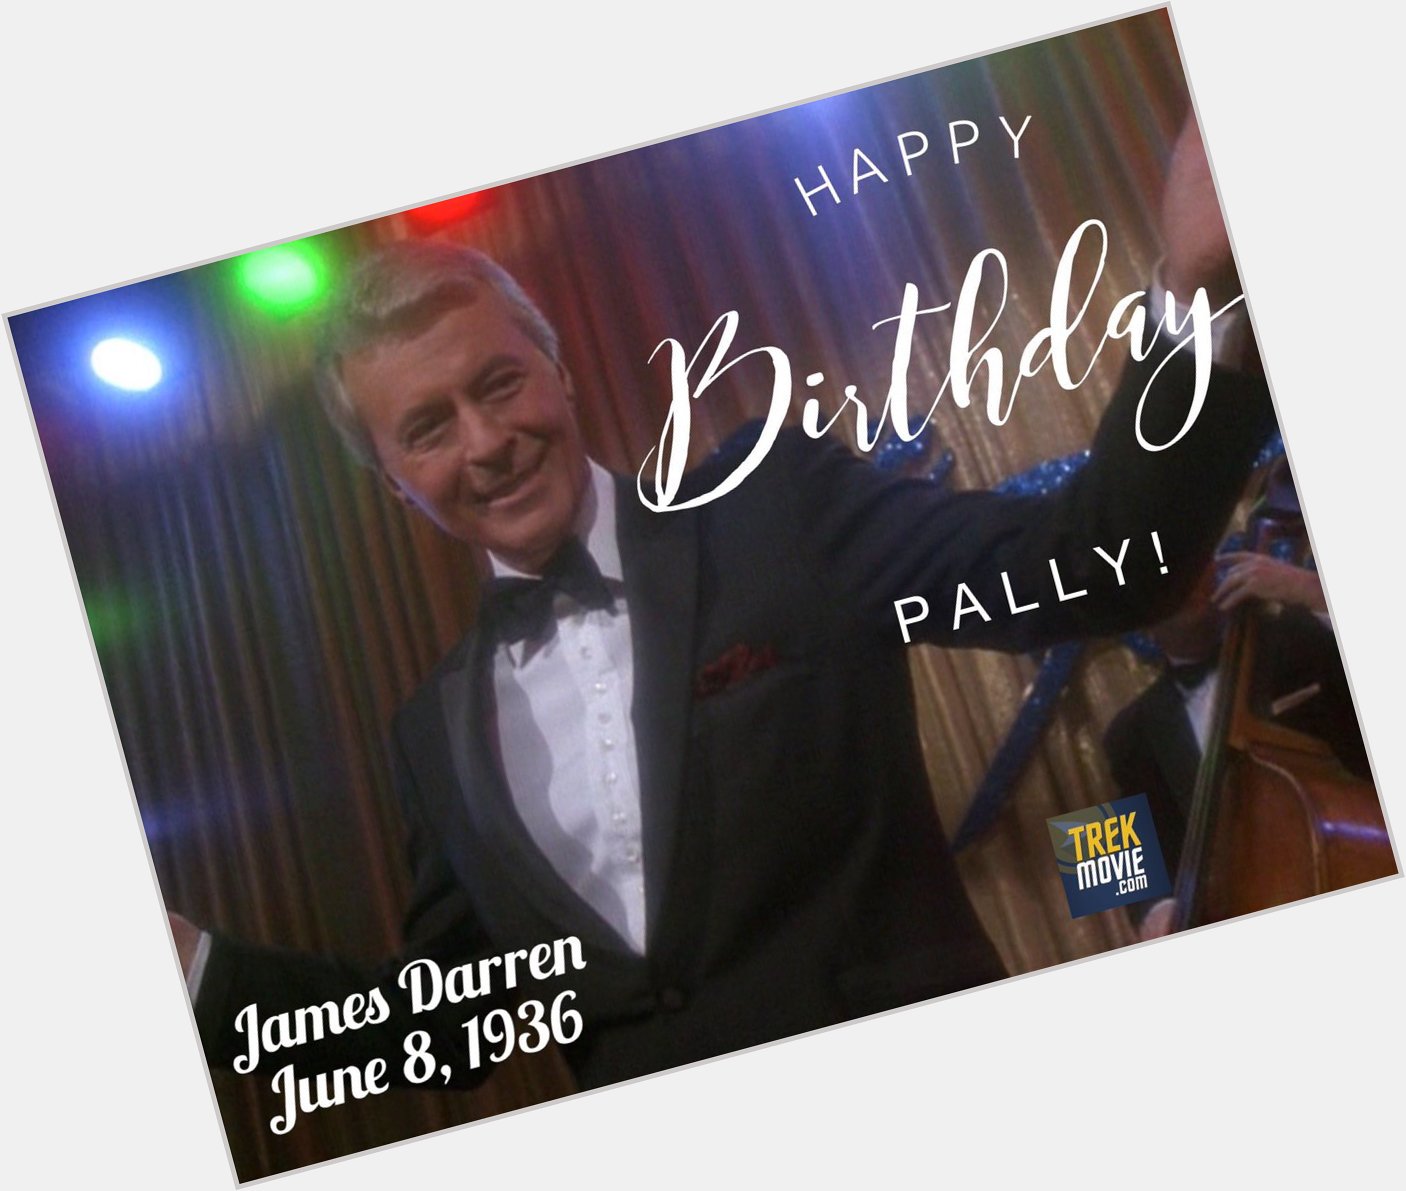 Wishing James Darren a happy birthday. What s your favorite Vic Fontaine moment?  